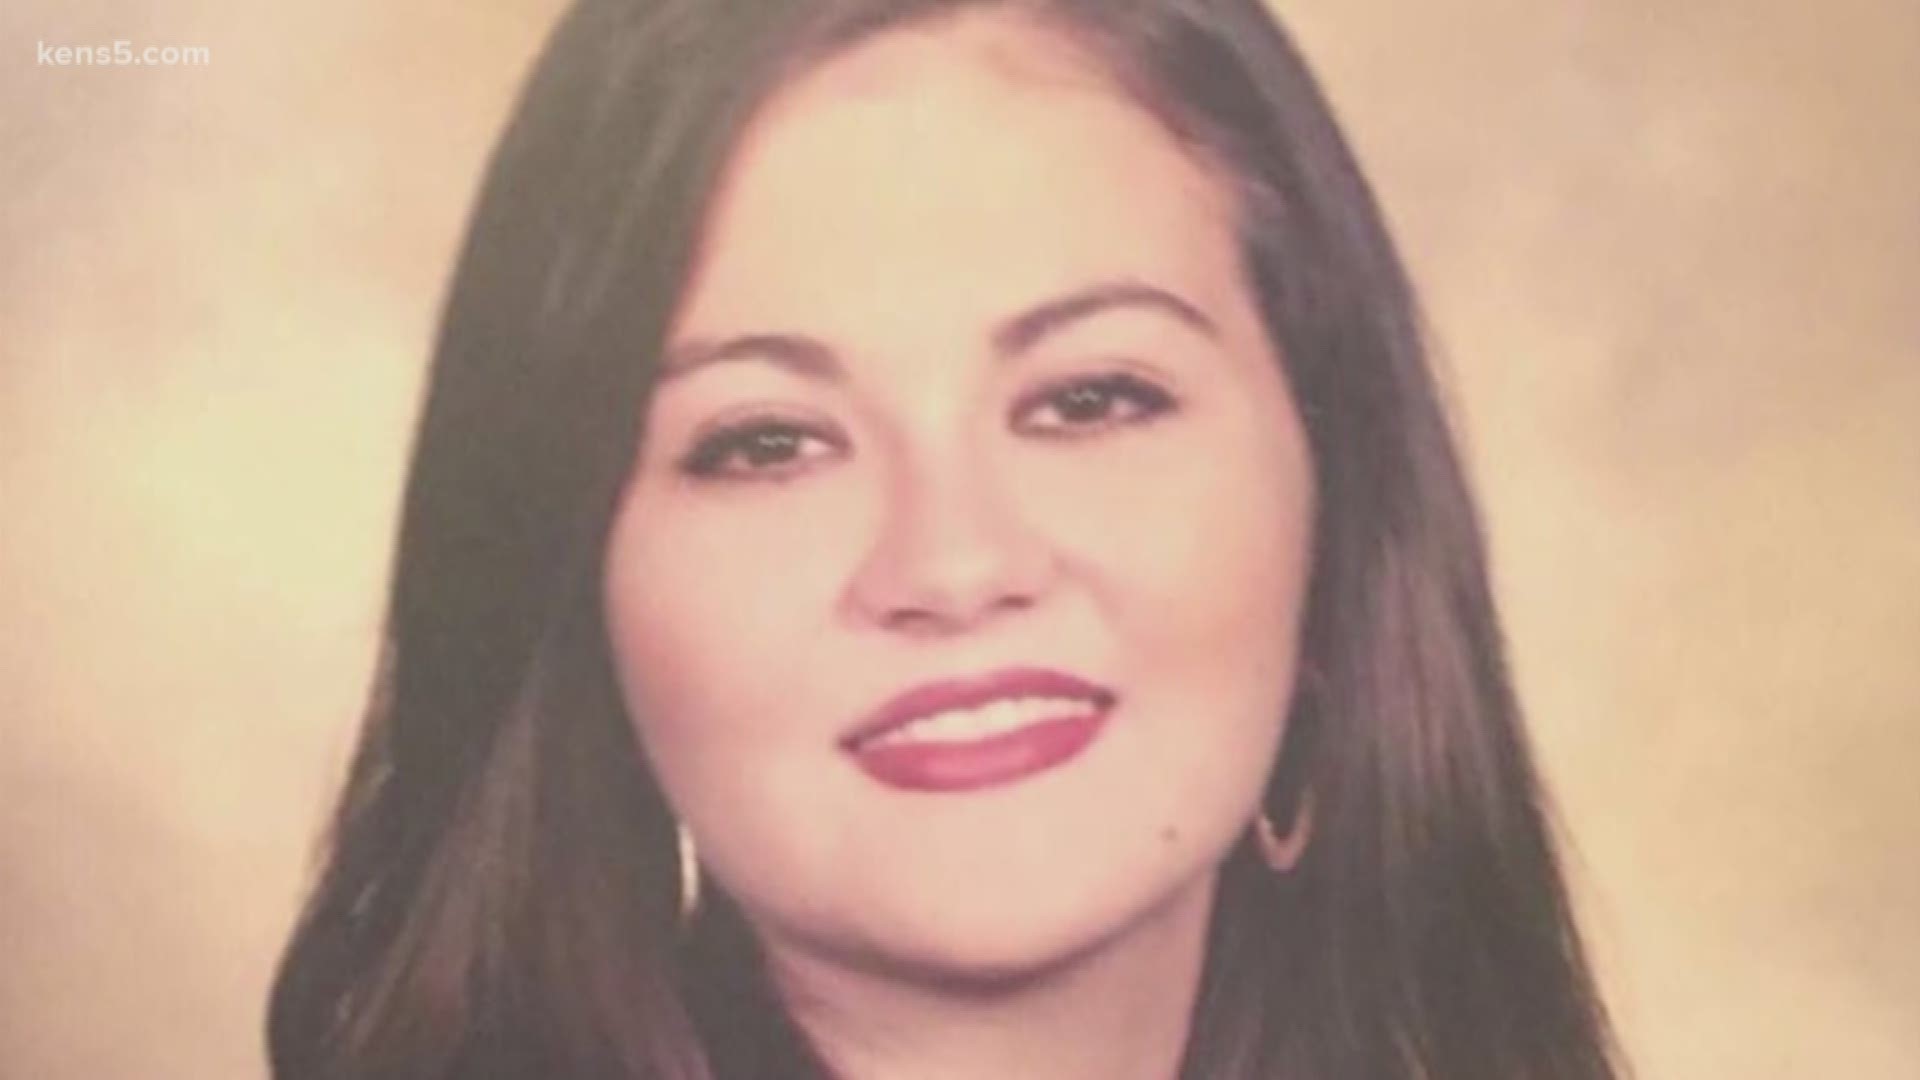 A family seeks to repair a loved one's name after falling victim to a series of South Texas murders.